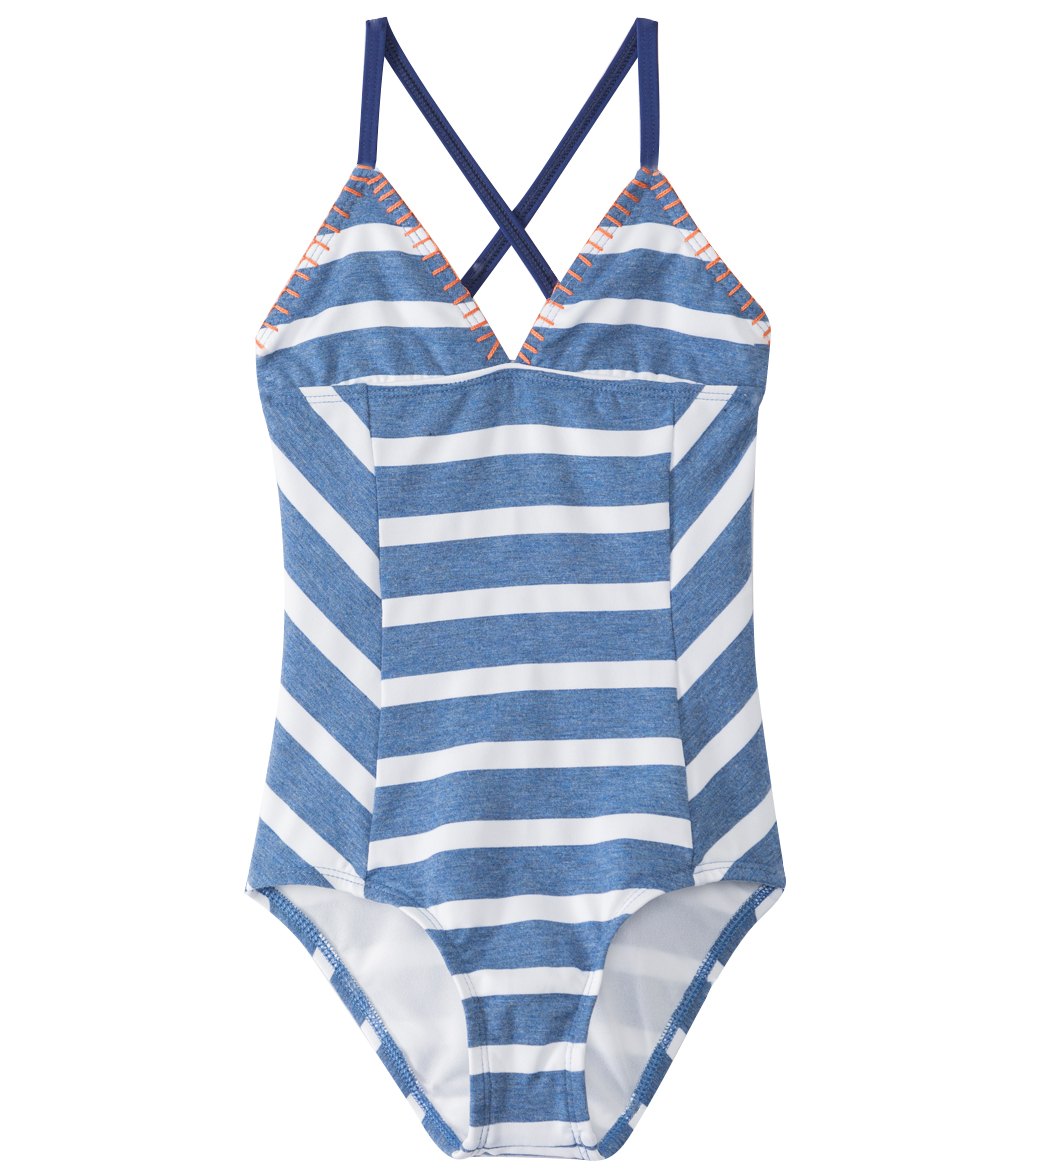 Splendid Girls' Chambray Cottage One Piece Swimsuit 7-14 - Blue 7 Nylon/Spandex/Polyester/Rayon - Swimoutlet.com